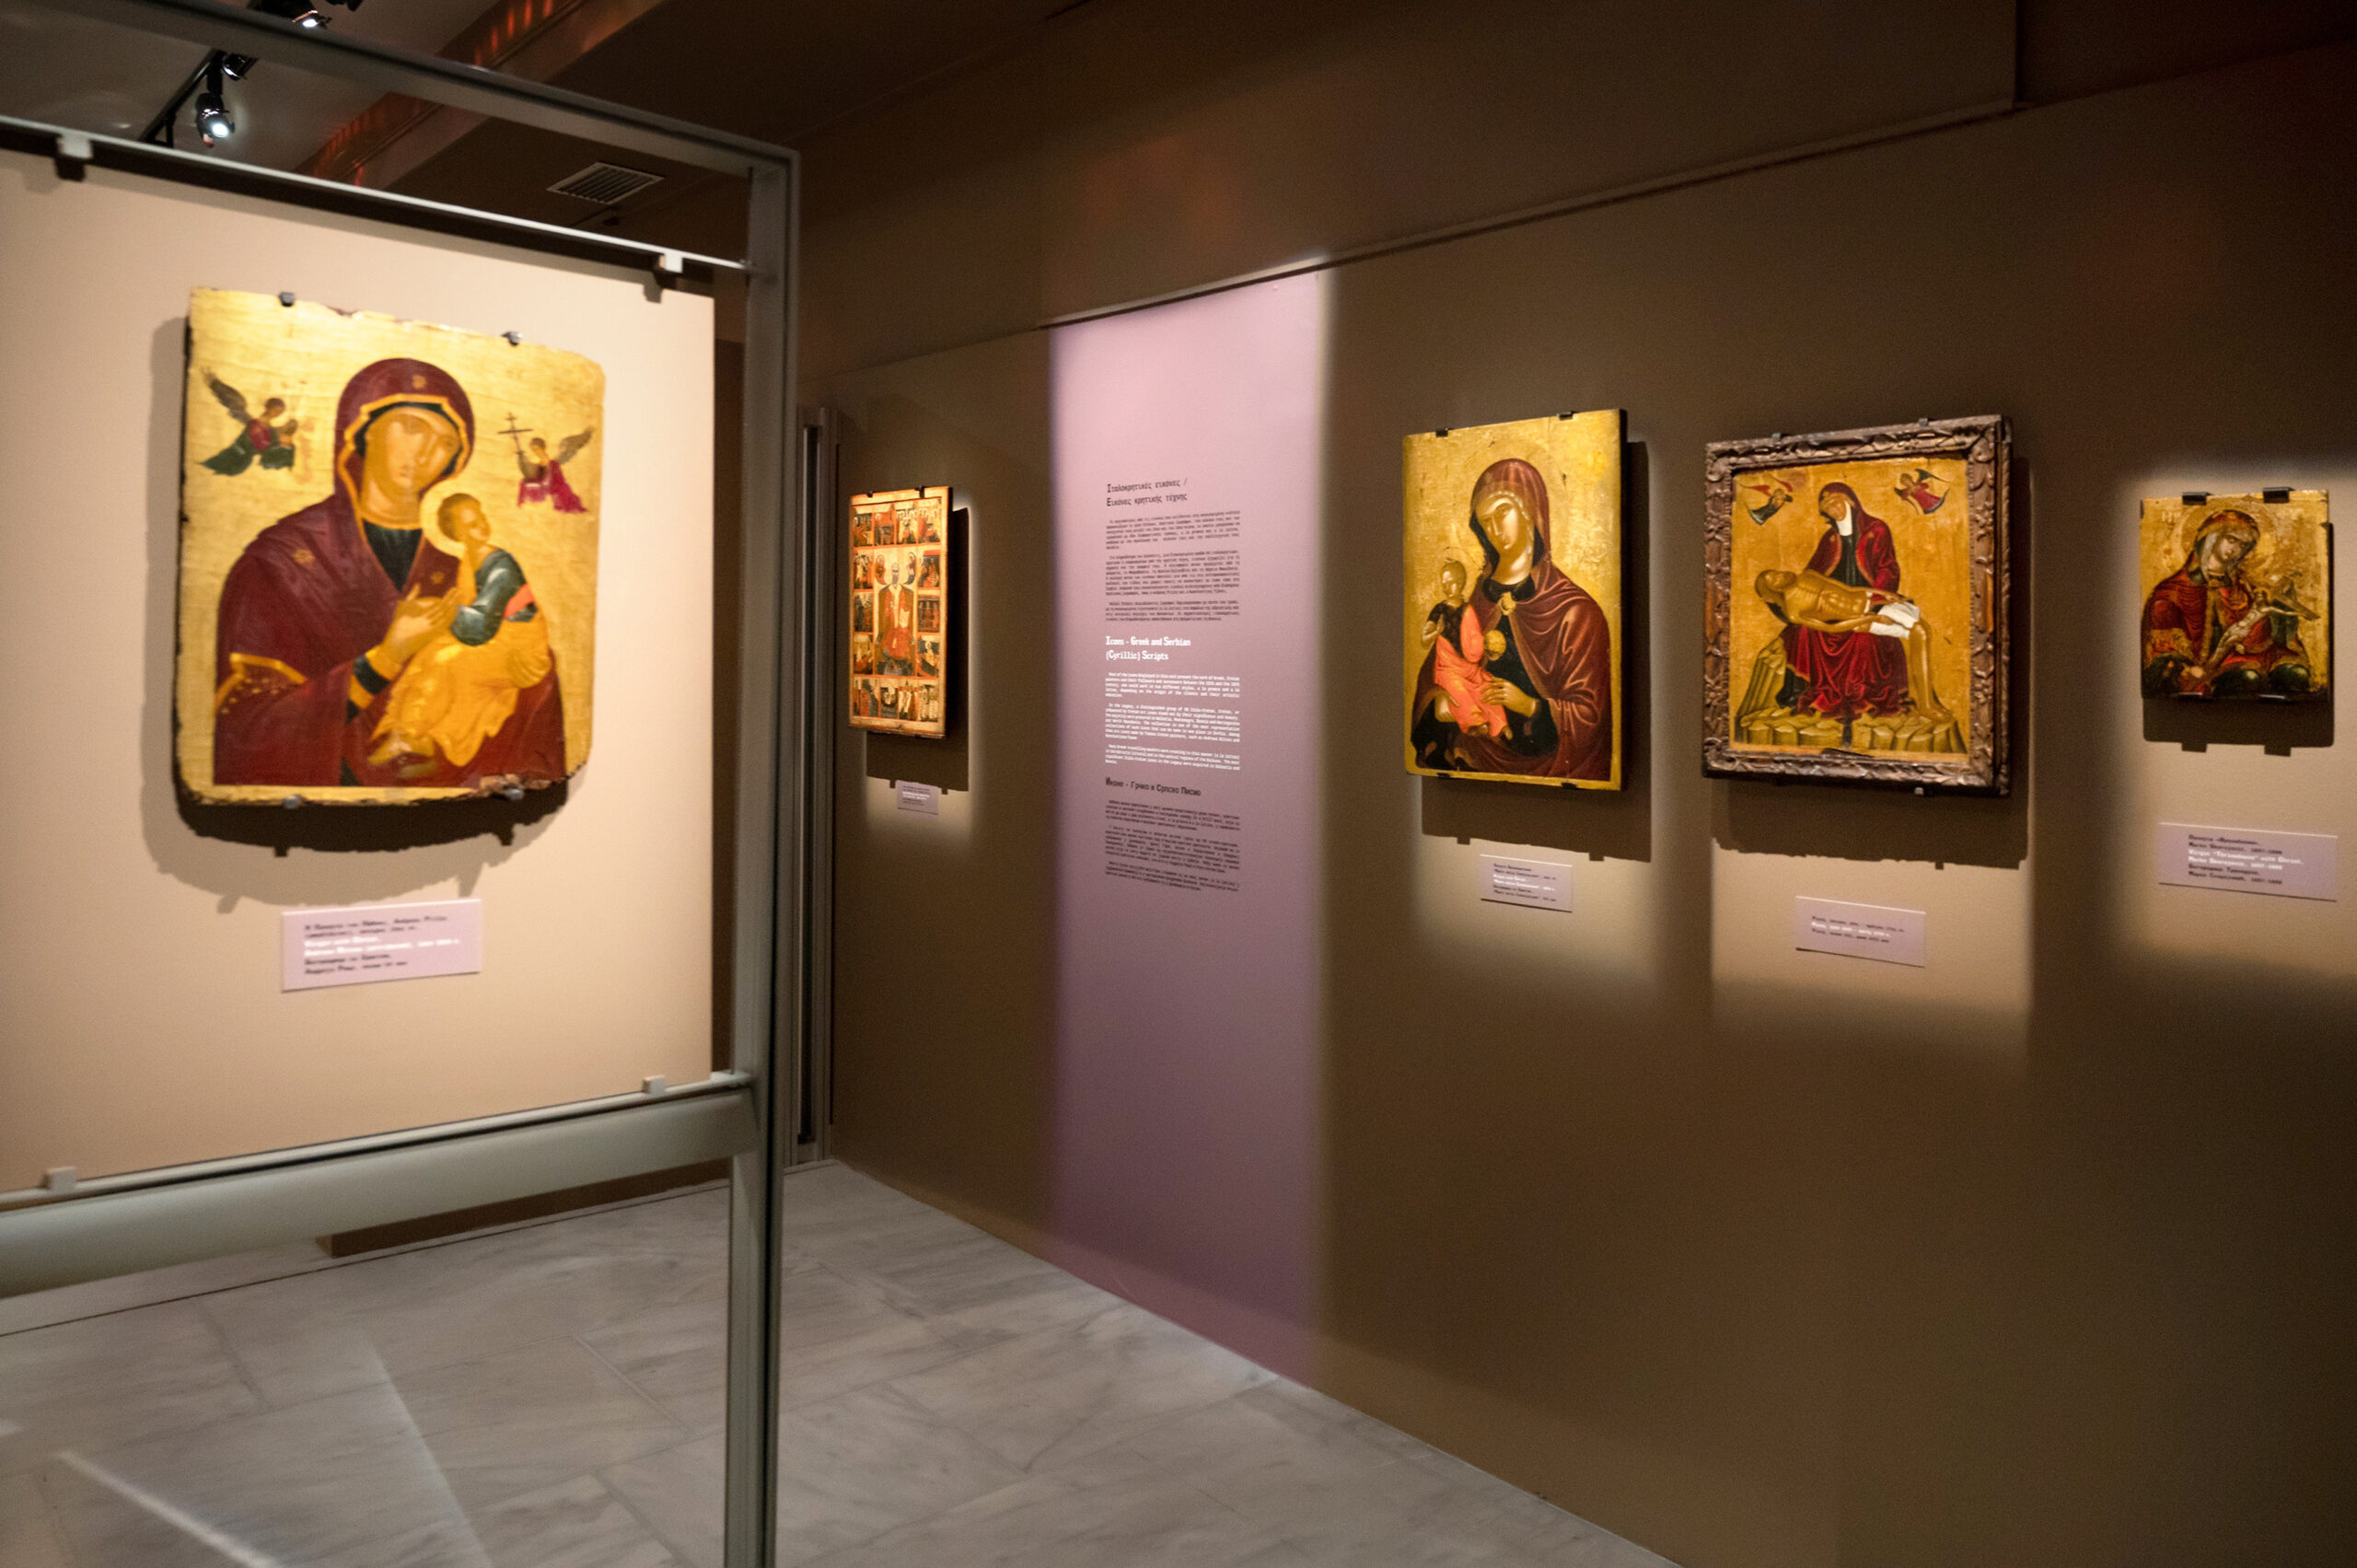 Temporary exhibition titled “From Crete to the Danube. Icons from the Sekulic Collection, Belgrade City Museum”